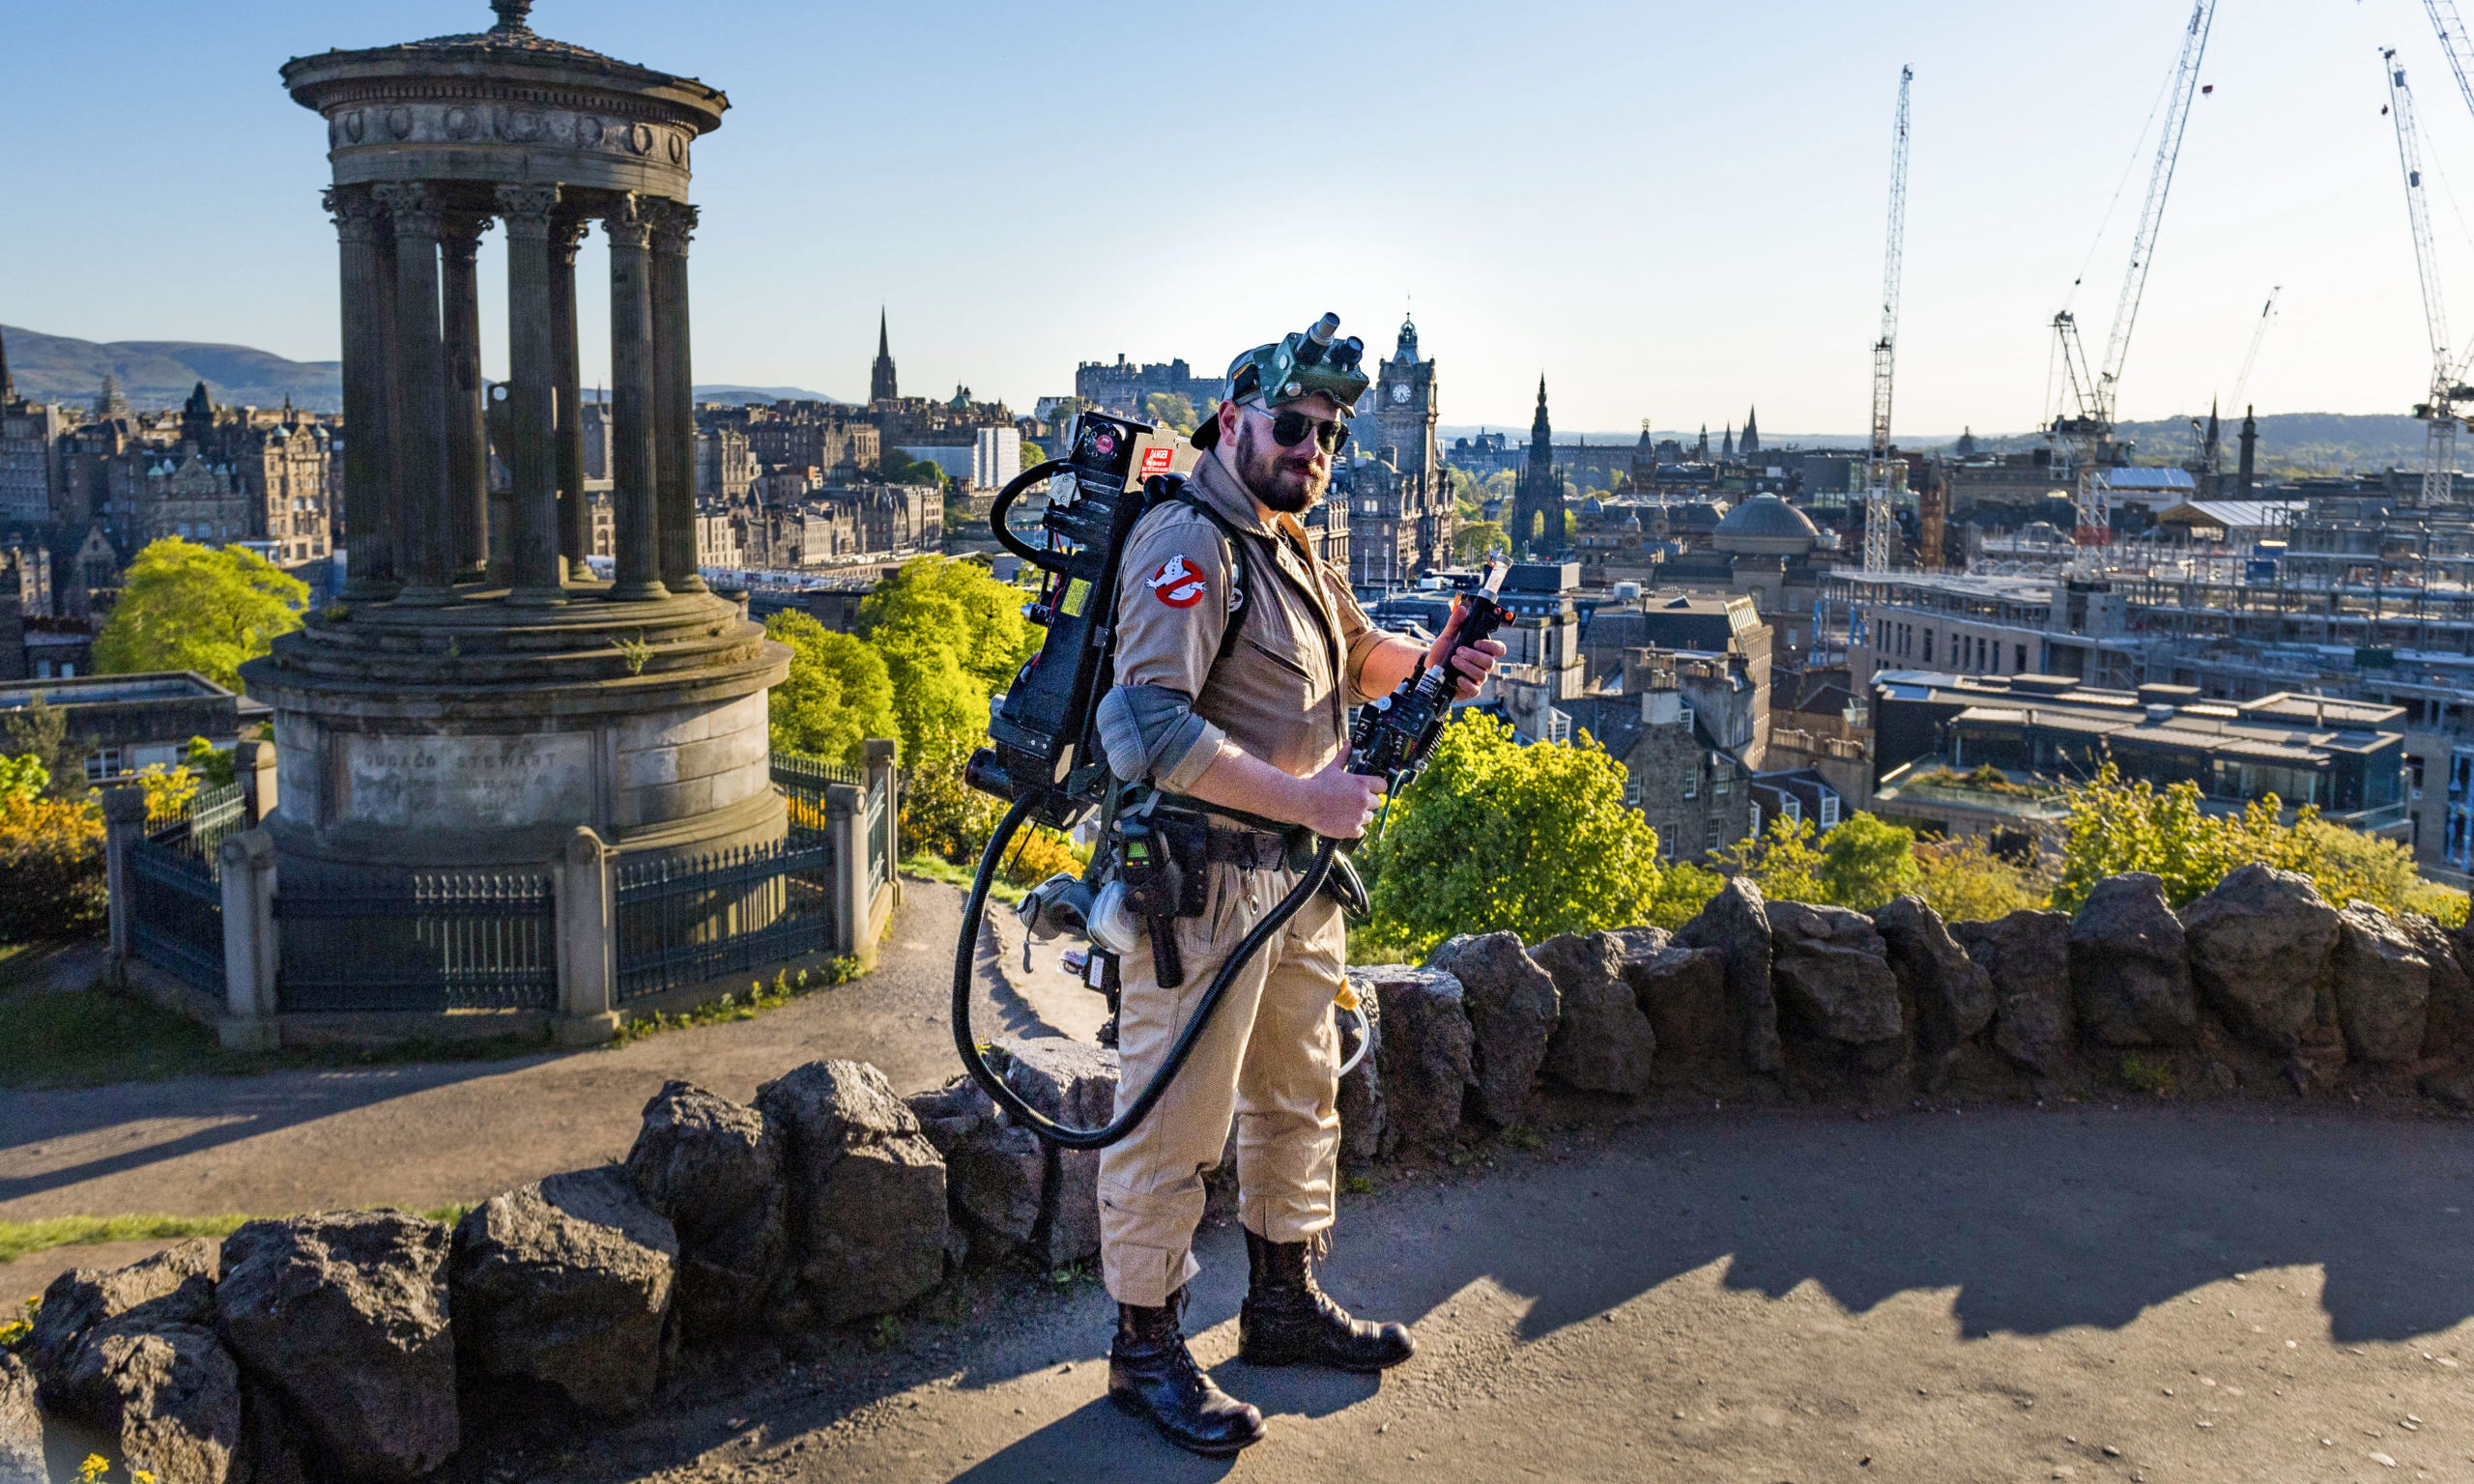 EDINBURGH, SCOTLAND - MAY 06: A person dressed as a Ghostbuster at Calton Hill is pictured during the ongoing coronavirus pandemic, on May 06, 2020, in Edinburgh, Scotland.
(Mark Scates / SNS Group)